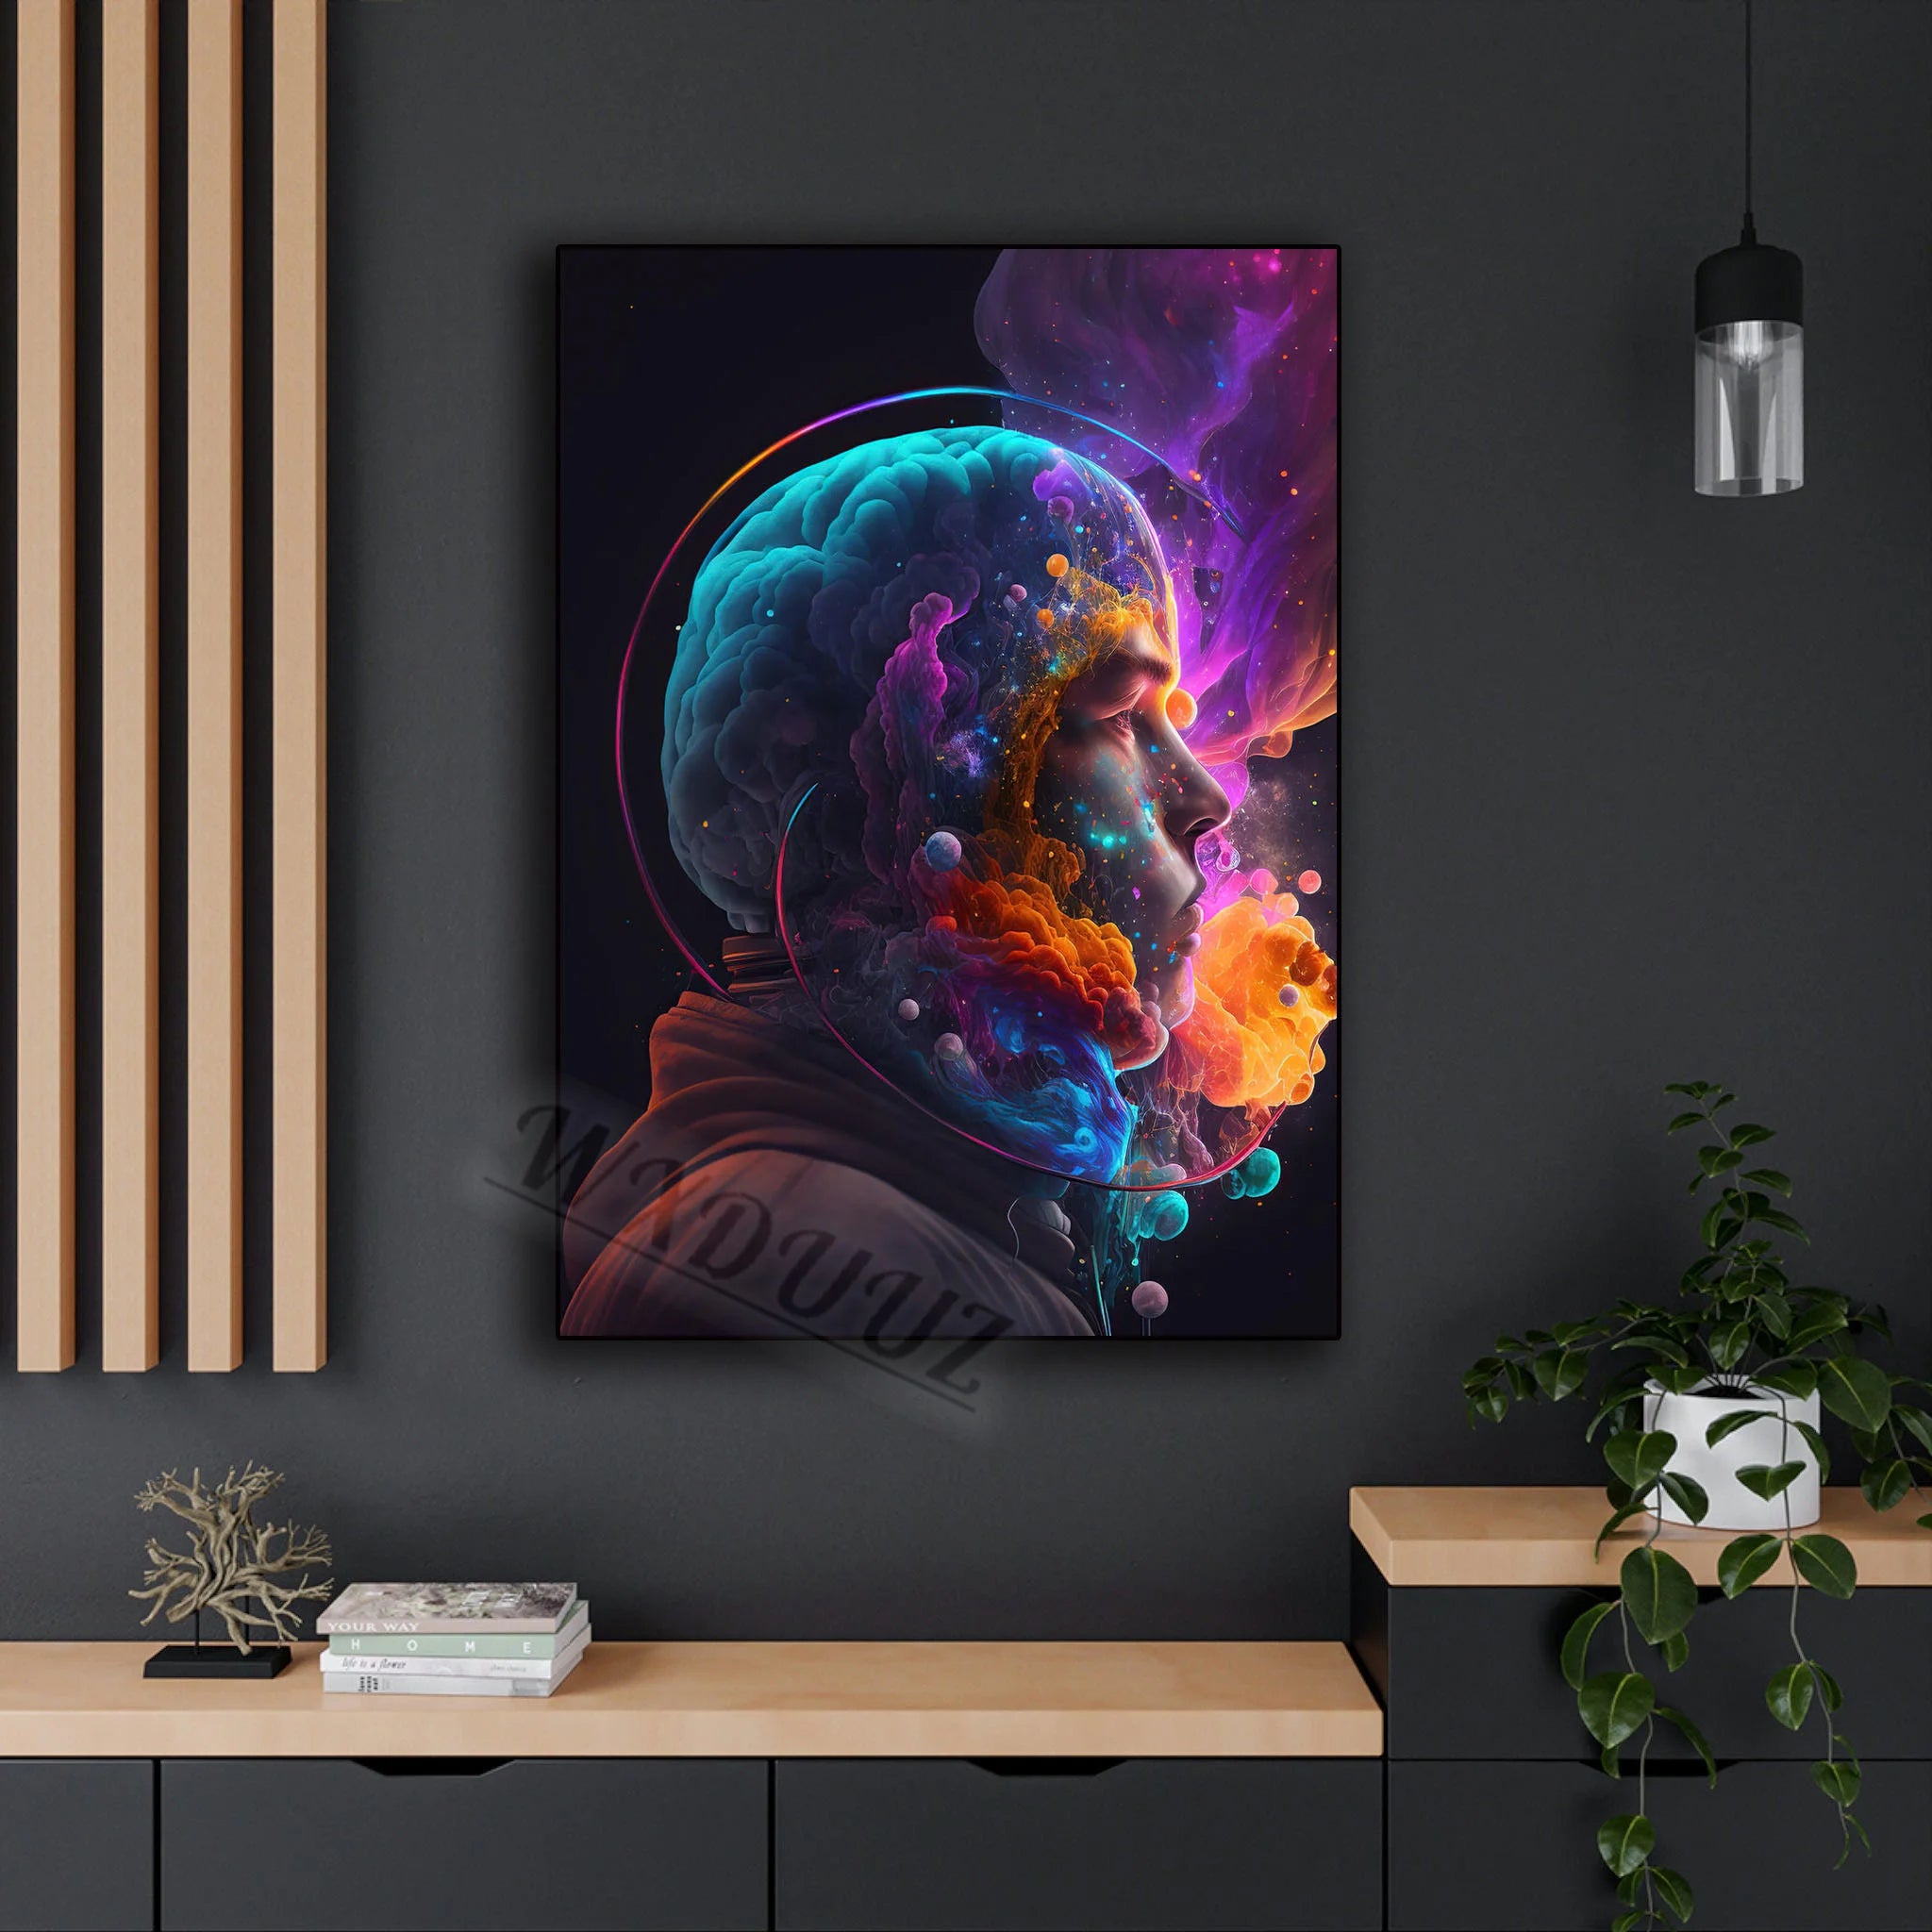 Space Astronaut Cyberpunk Nordic Game Watercolor Art H / 20x30cm No Framed